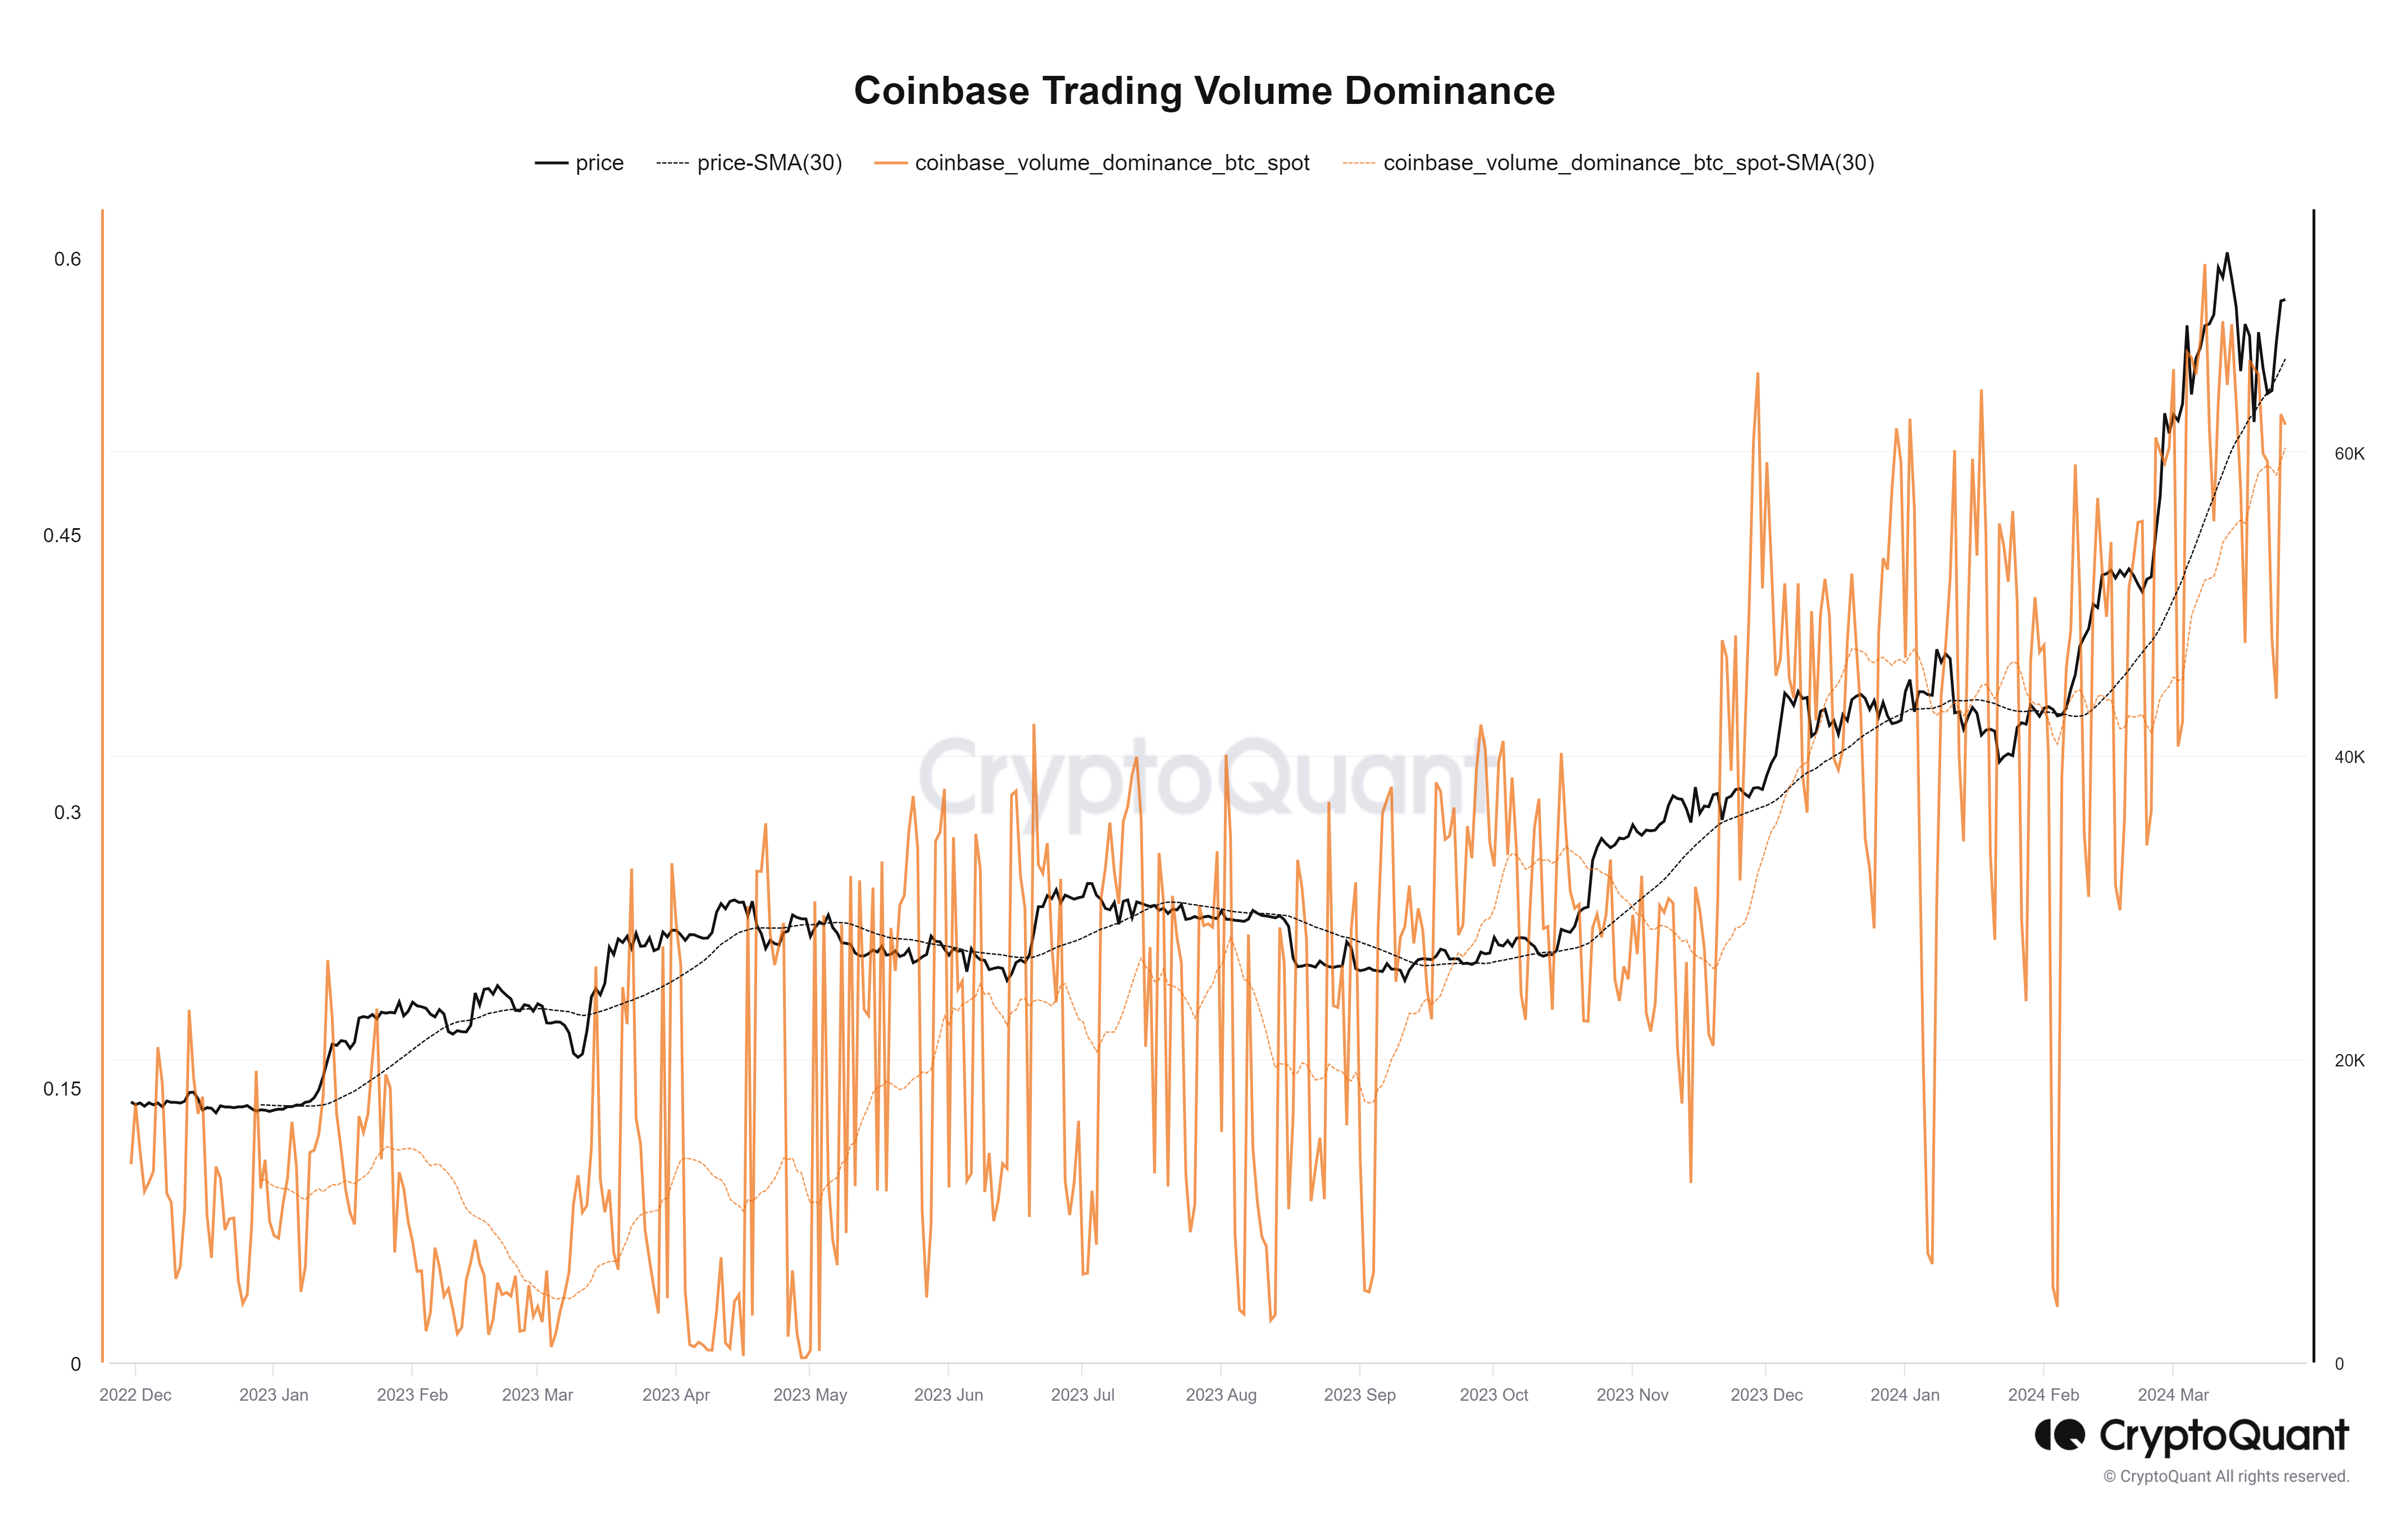 Coinbase Trading Volume Dominance: (Source: CryptoQuant)